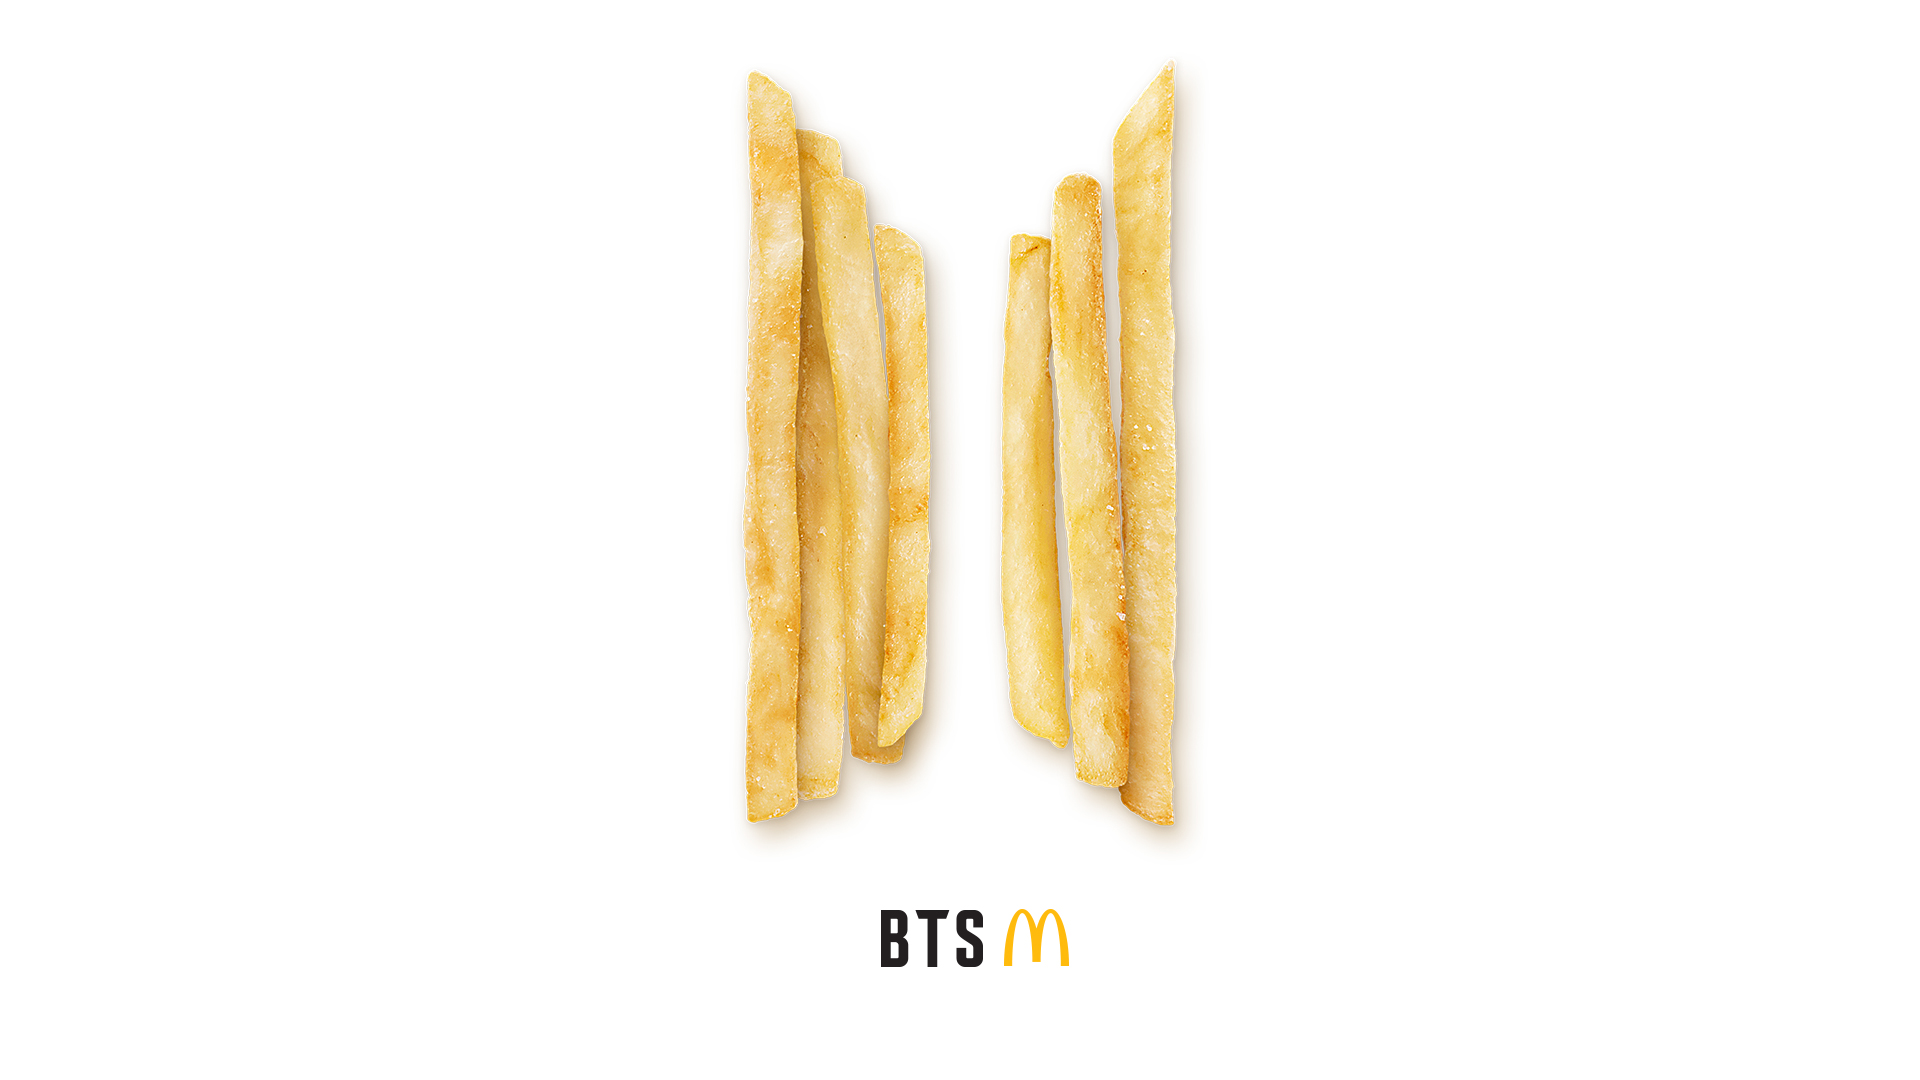 Meal mcd menu bts All about